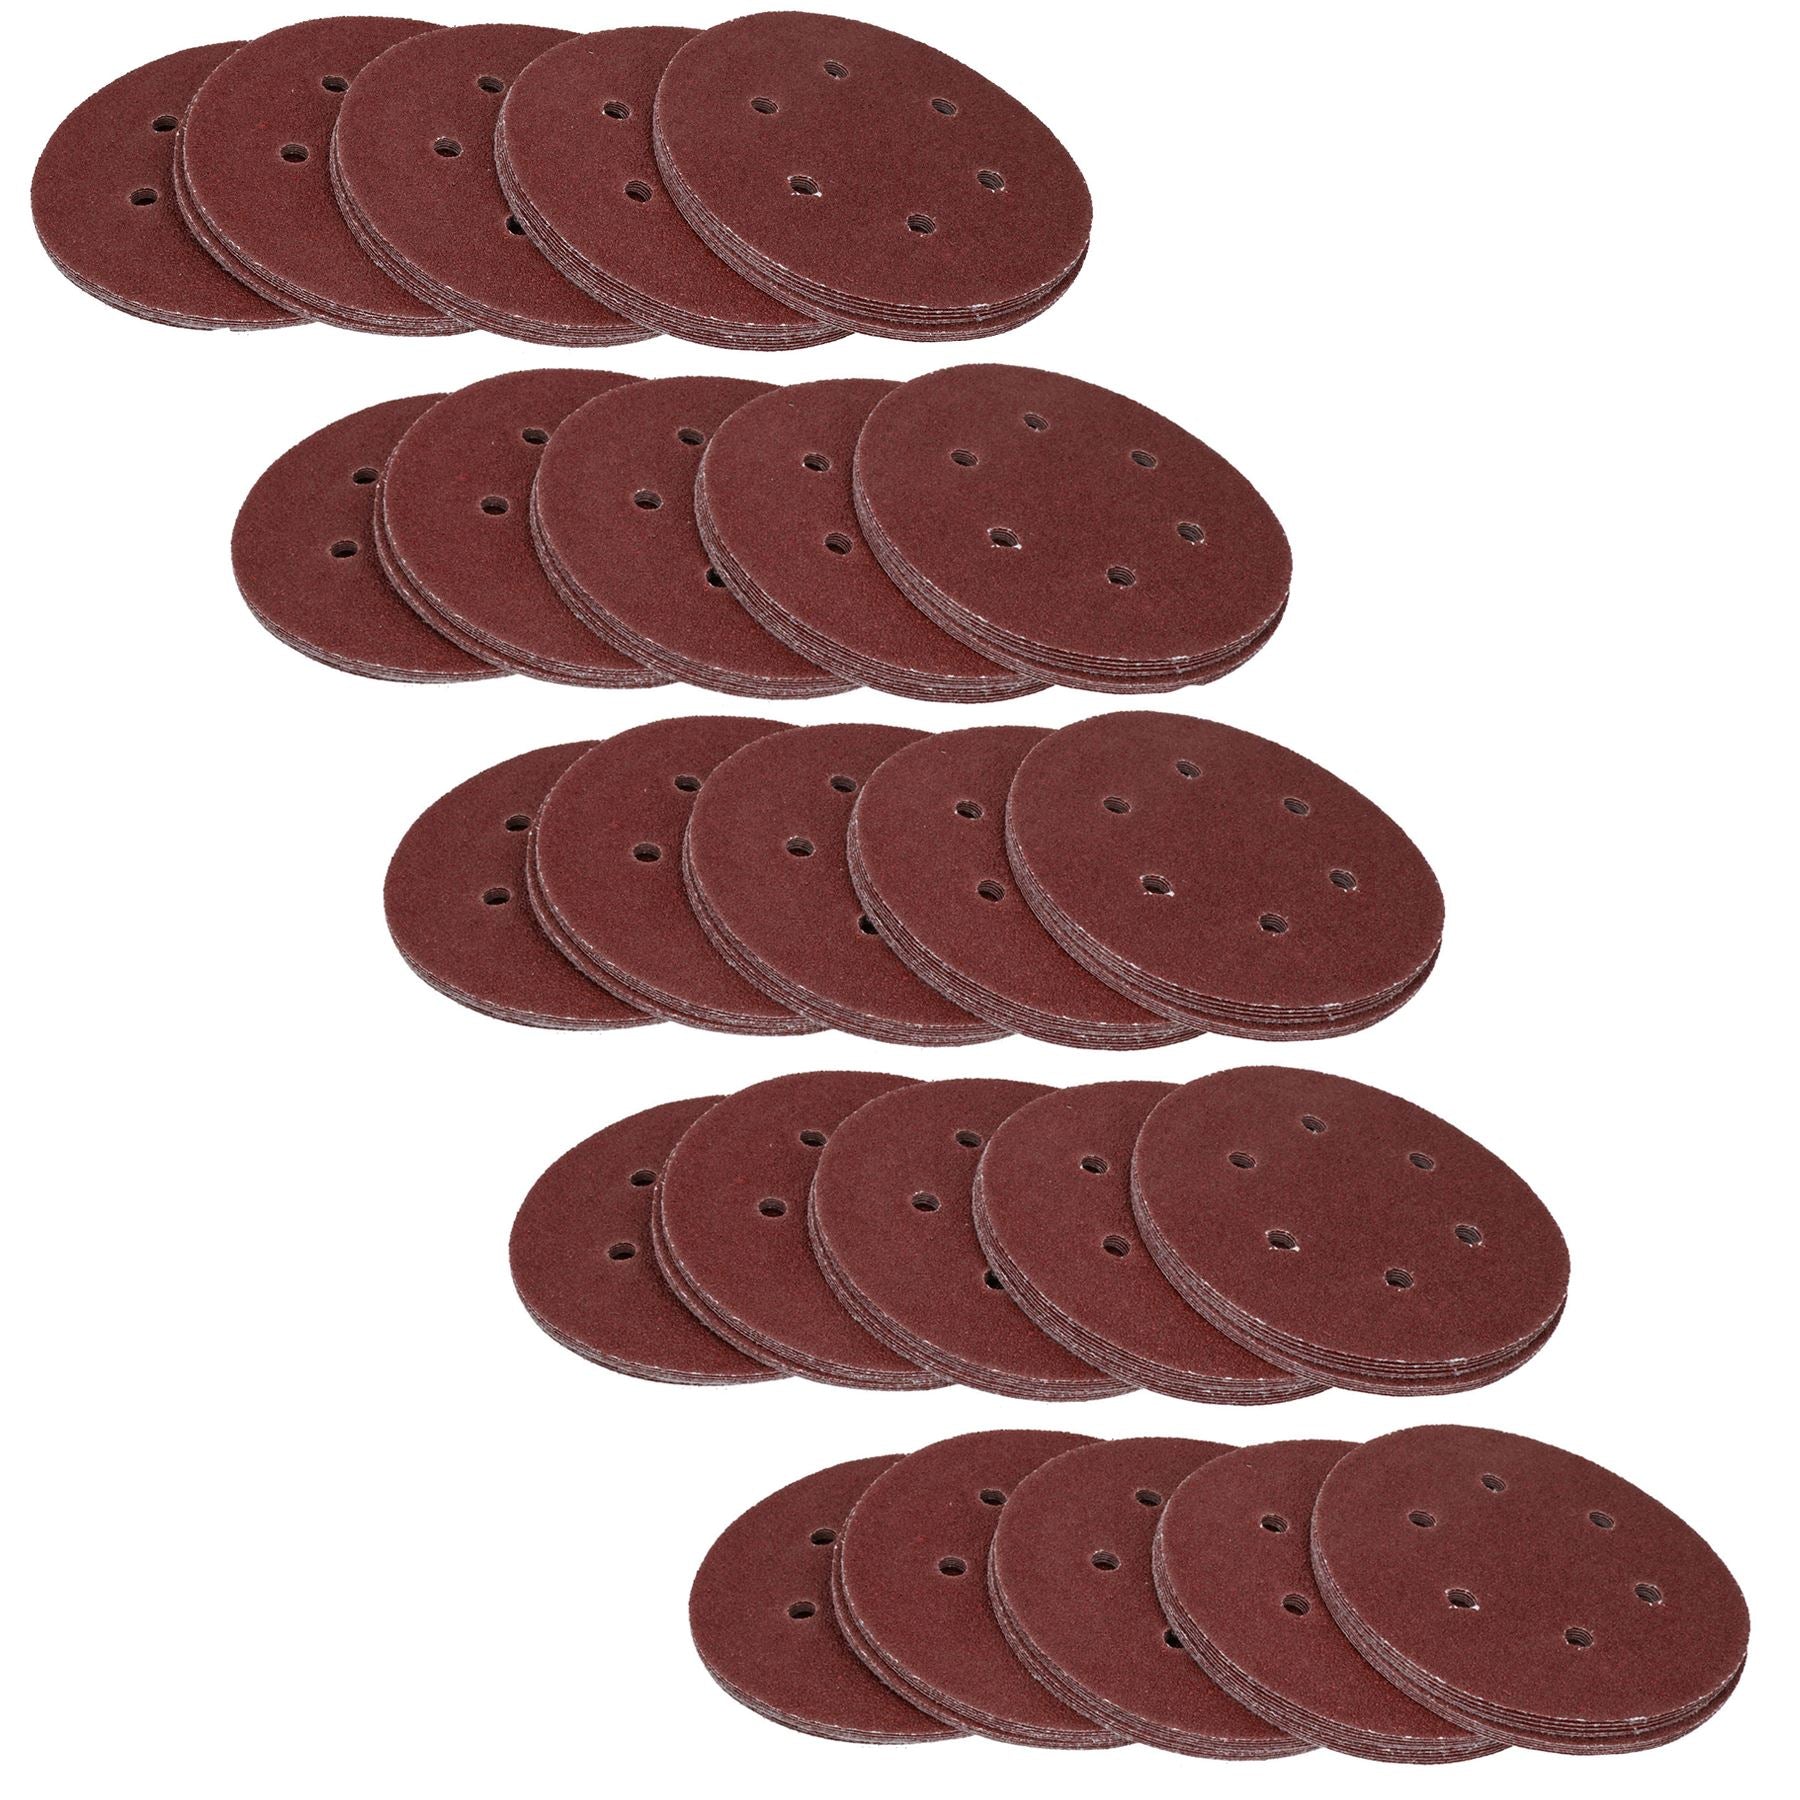 150mm Mixed Grit Hook And Loop Sanding Abrasive Discs Mixed Grit 40 – 240 Grits